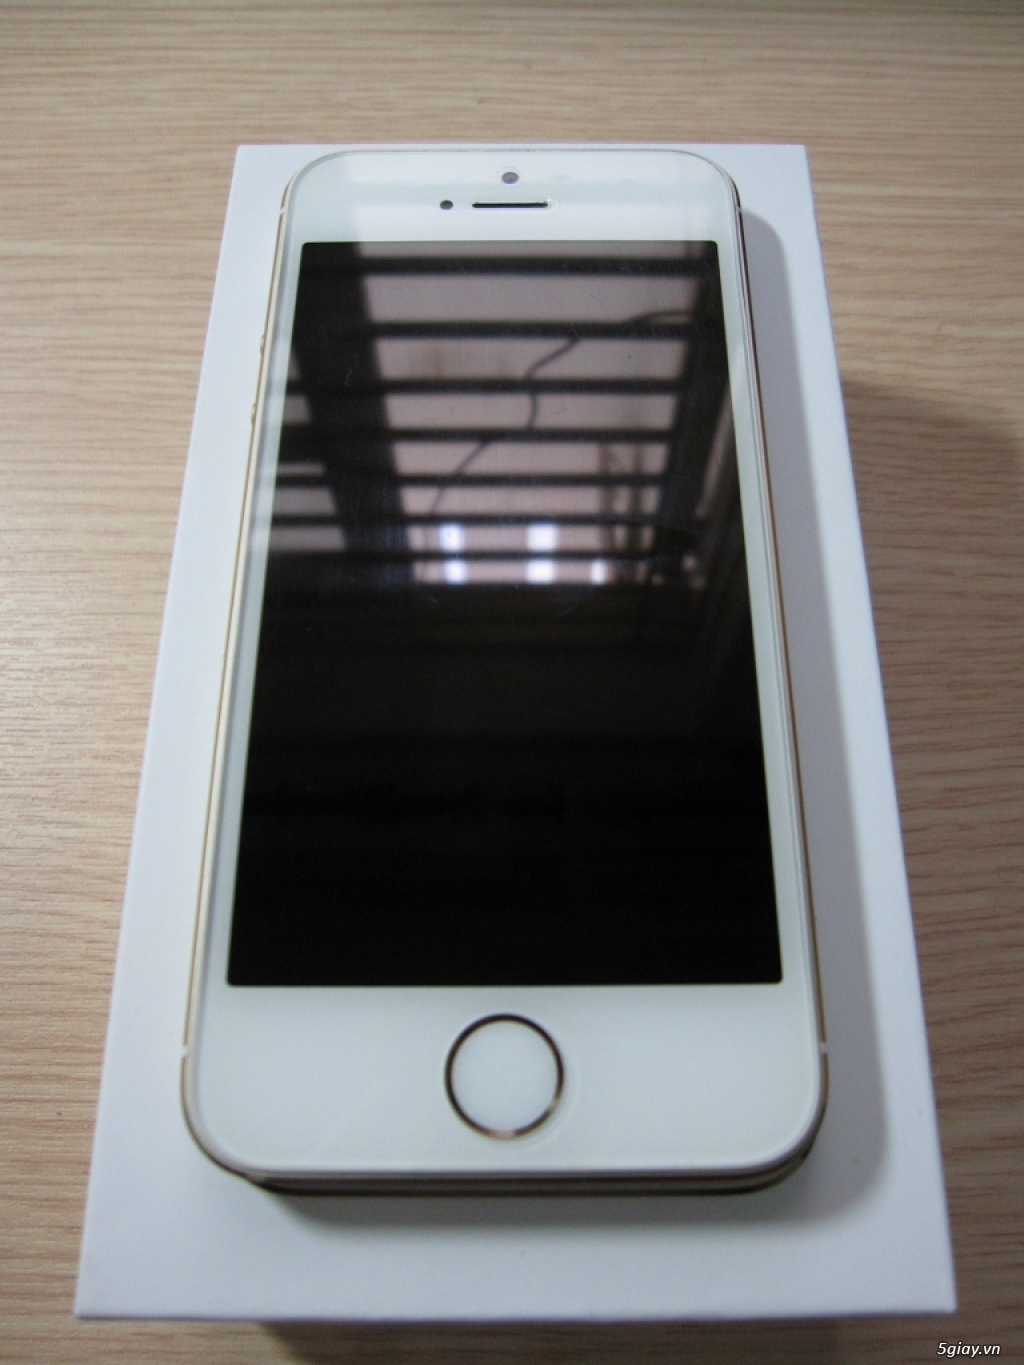 Iphone 5 16gb Gold like new 95% - 2